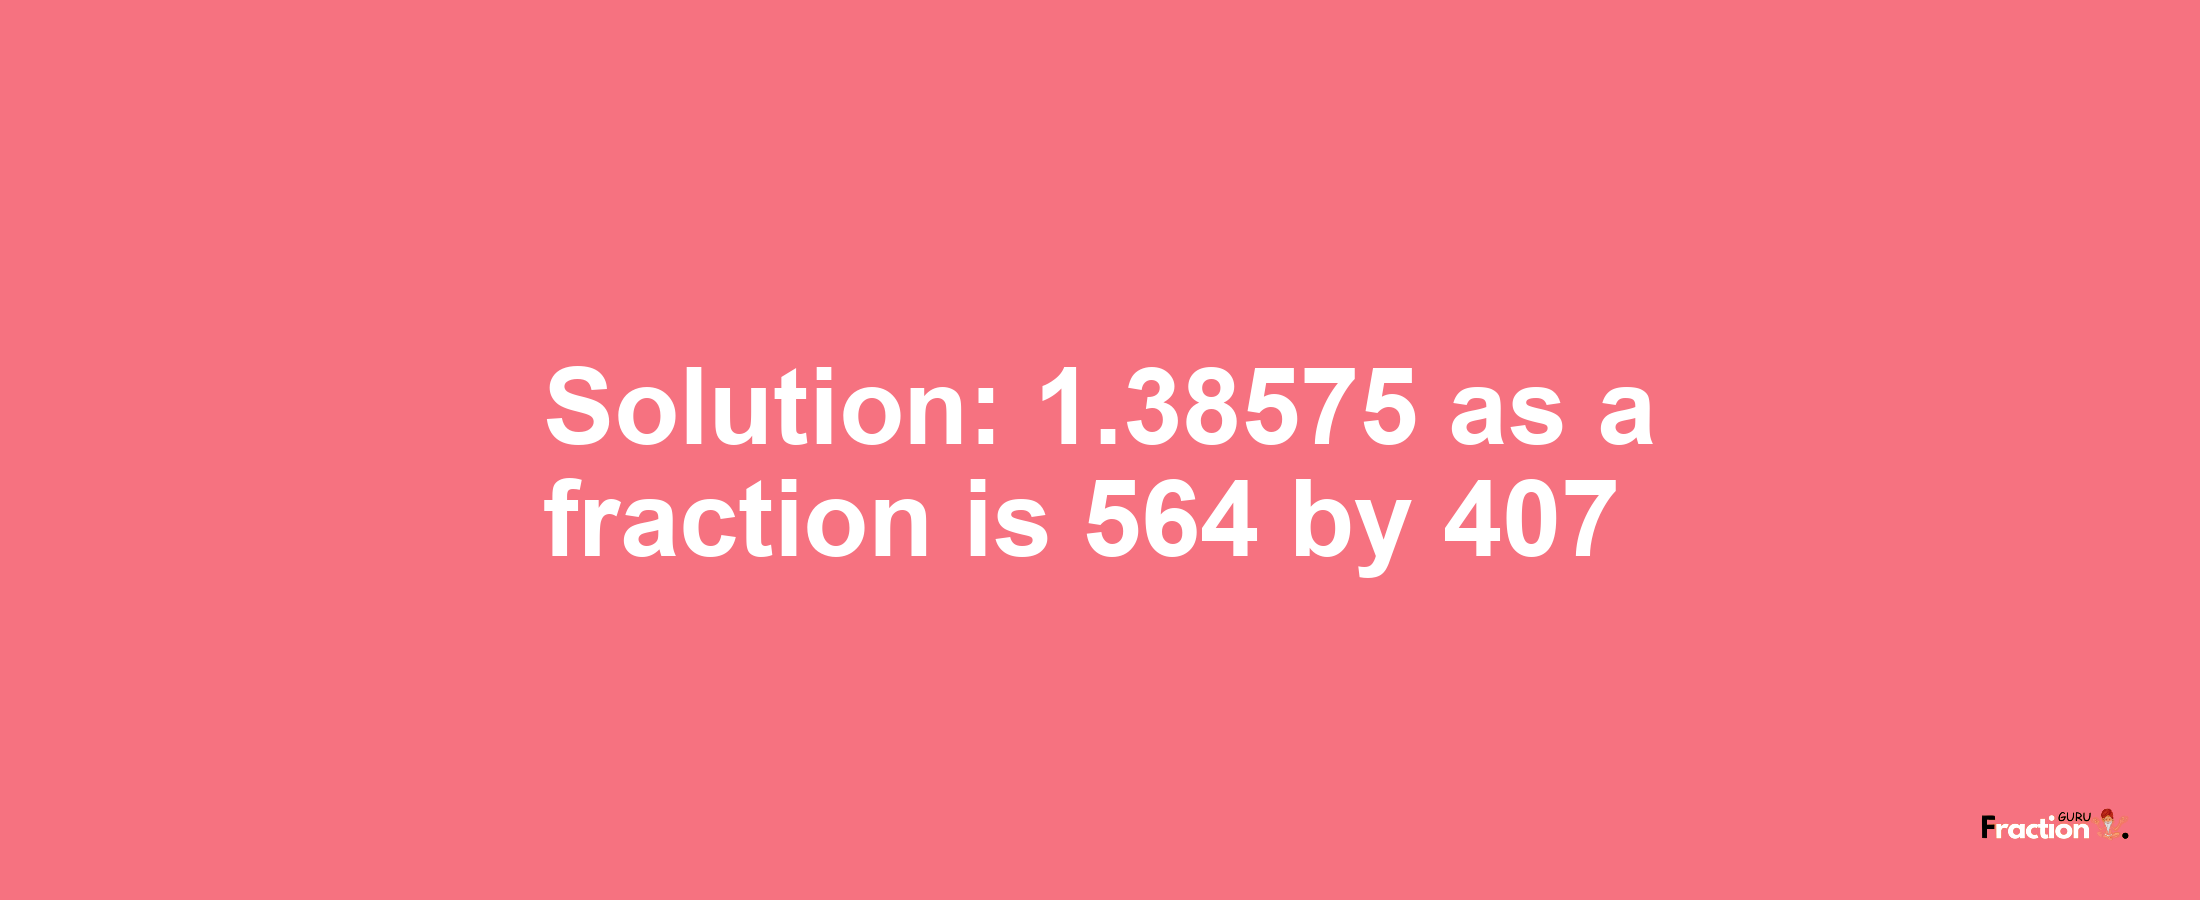 Solution:1.38575 as a fraction is 564/407